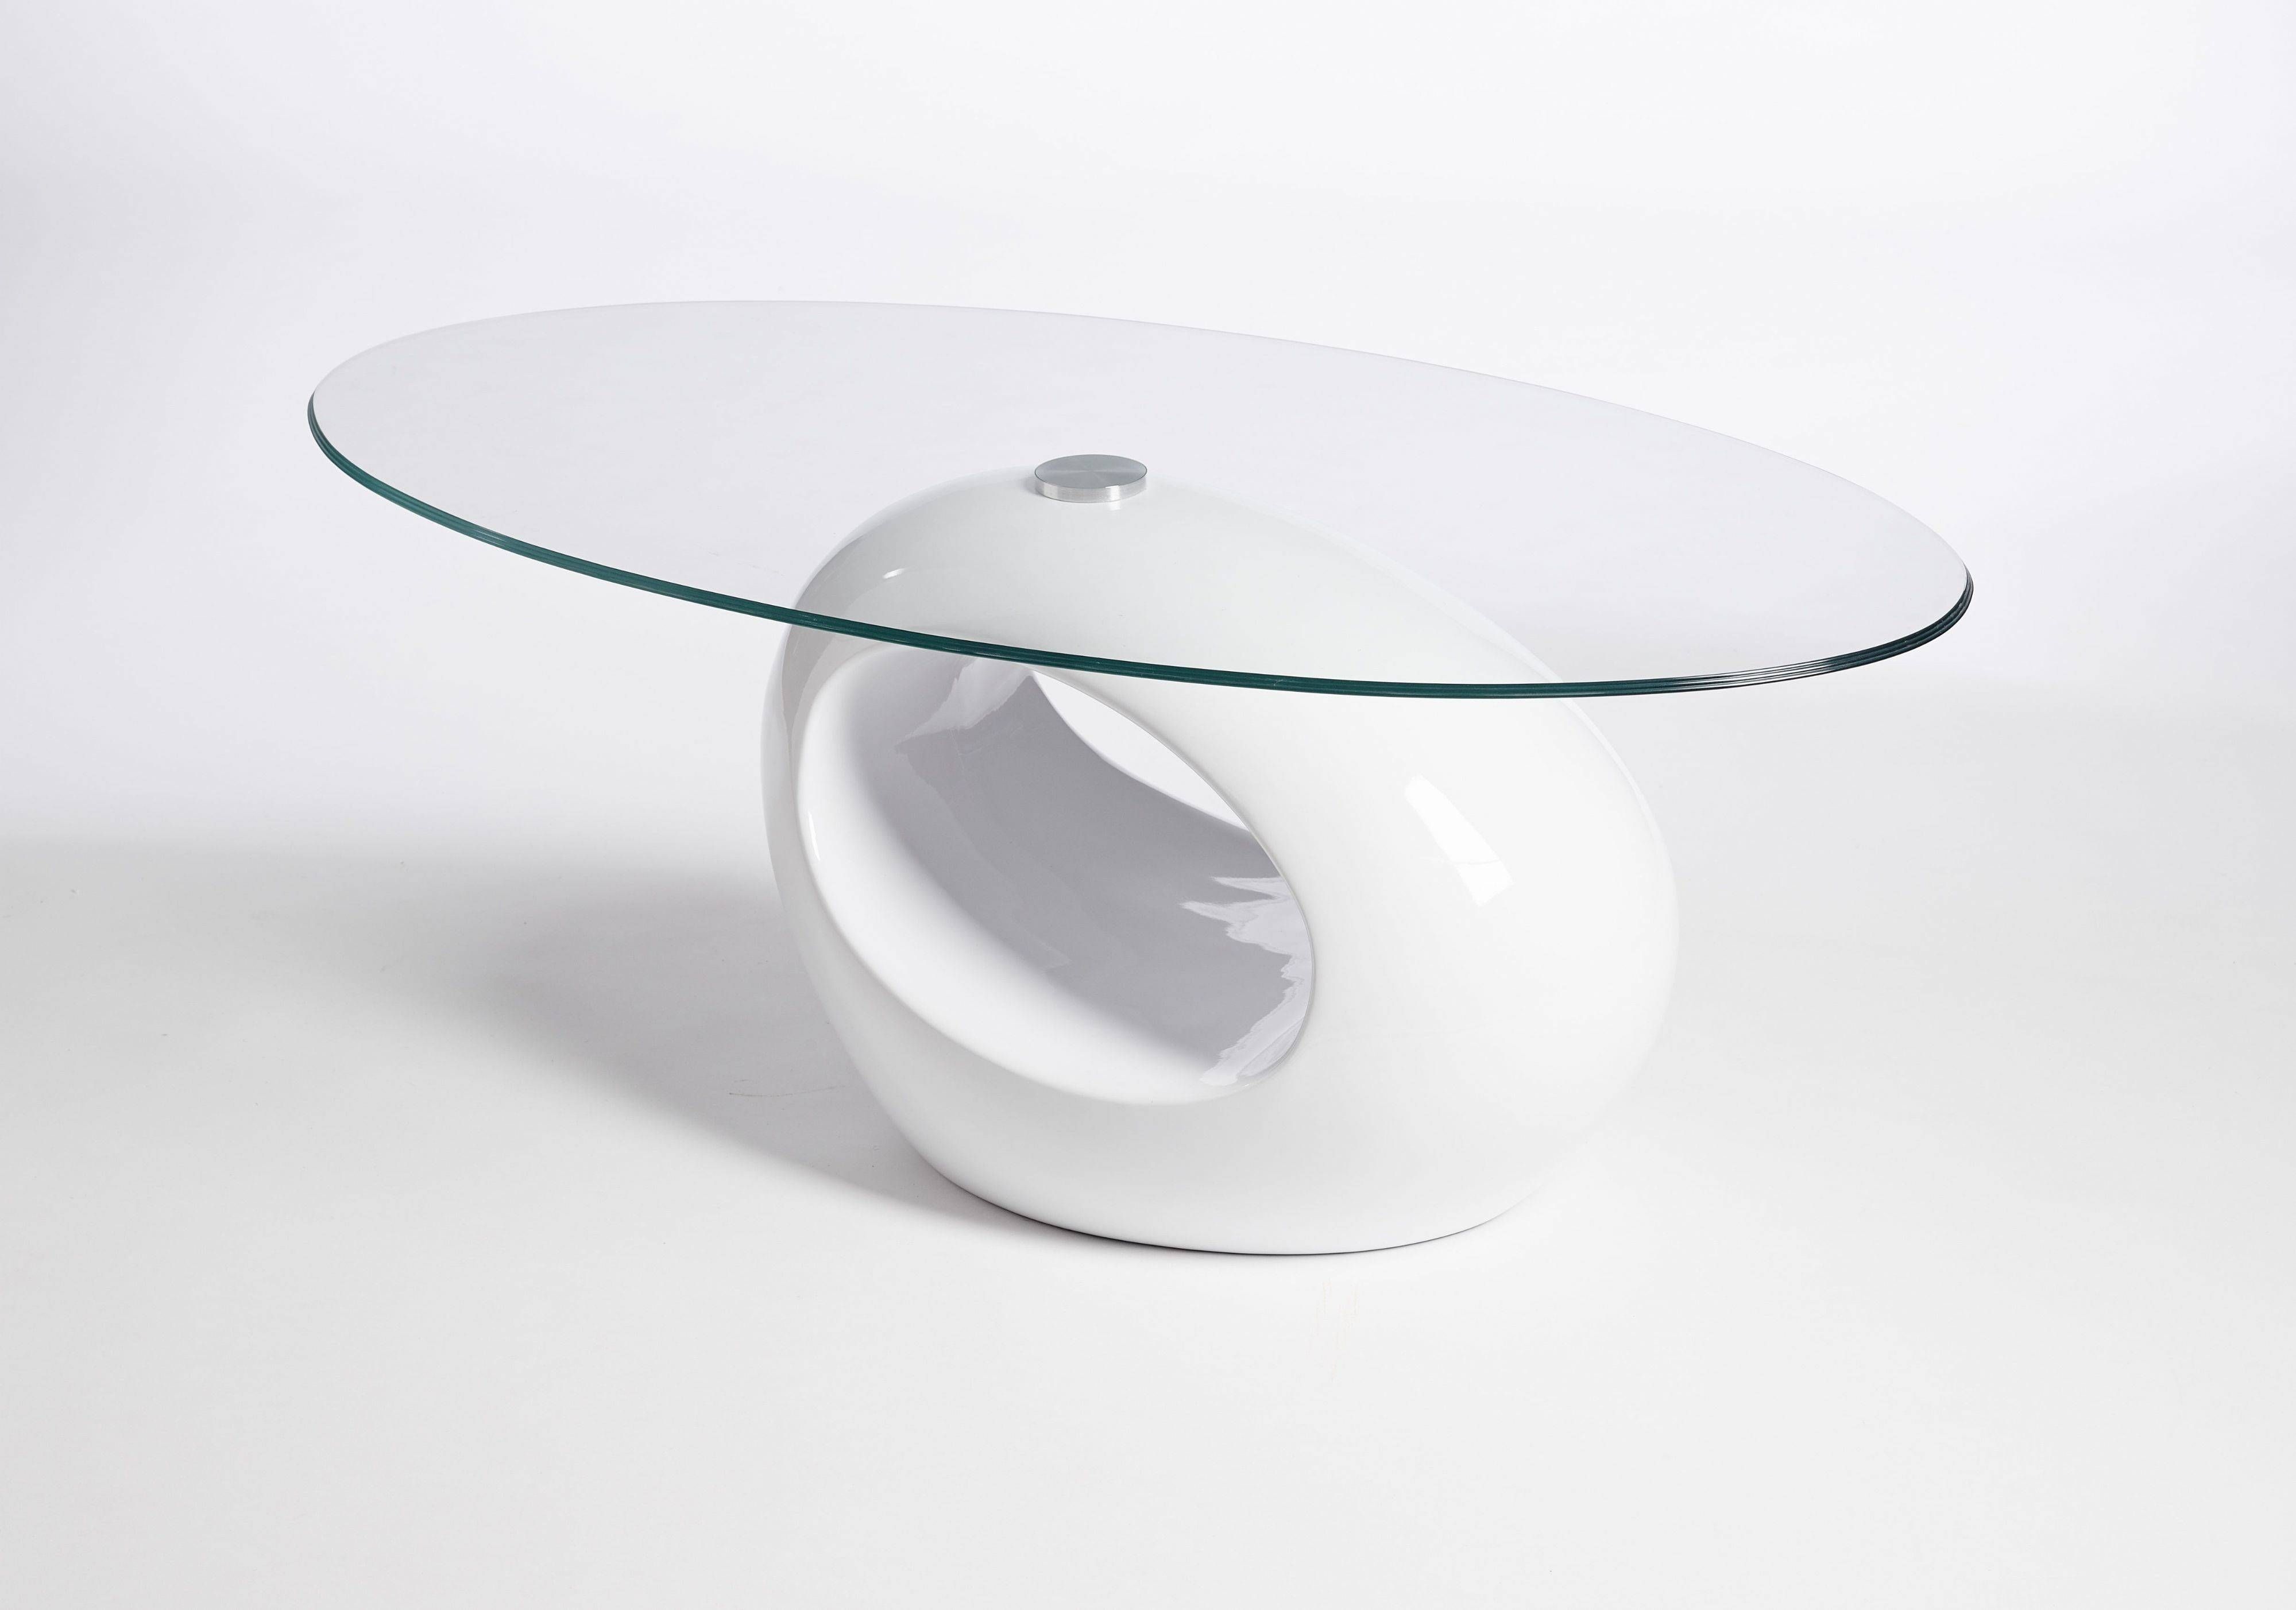 Retro Designed Oval Coffee Table (black Clear) | Ukcoffeetables Throughout Retro White Coffee Tables (View 12 of 30)